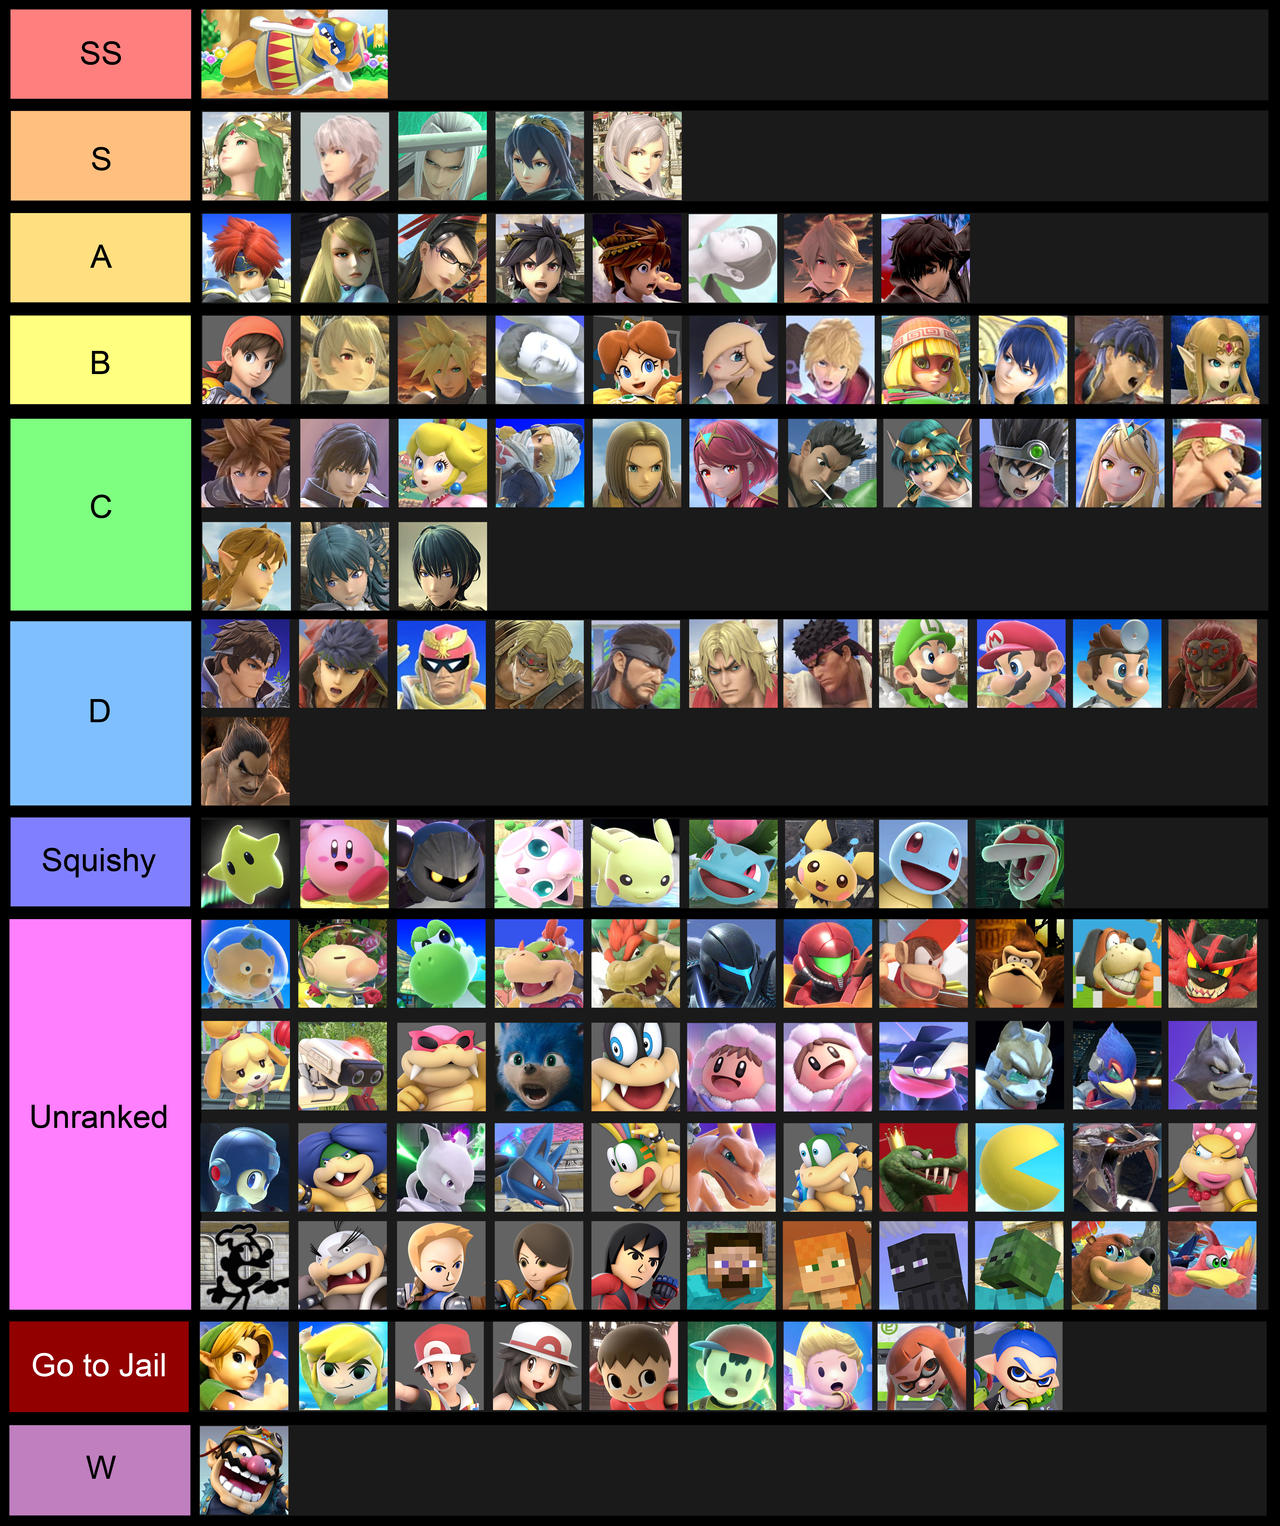 Super Smash Bros Ultimate Tier List: All fighters ranked plus the